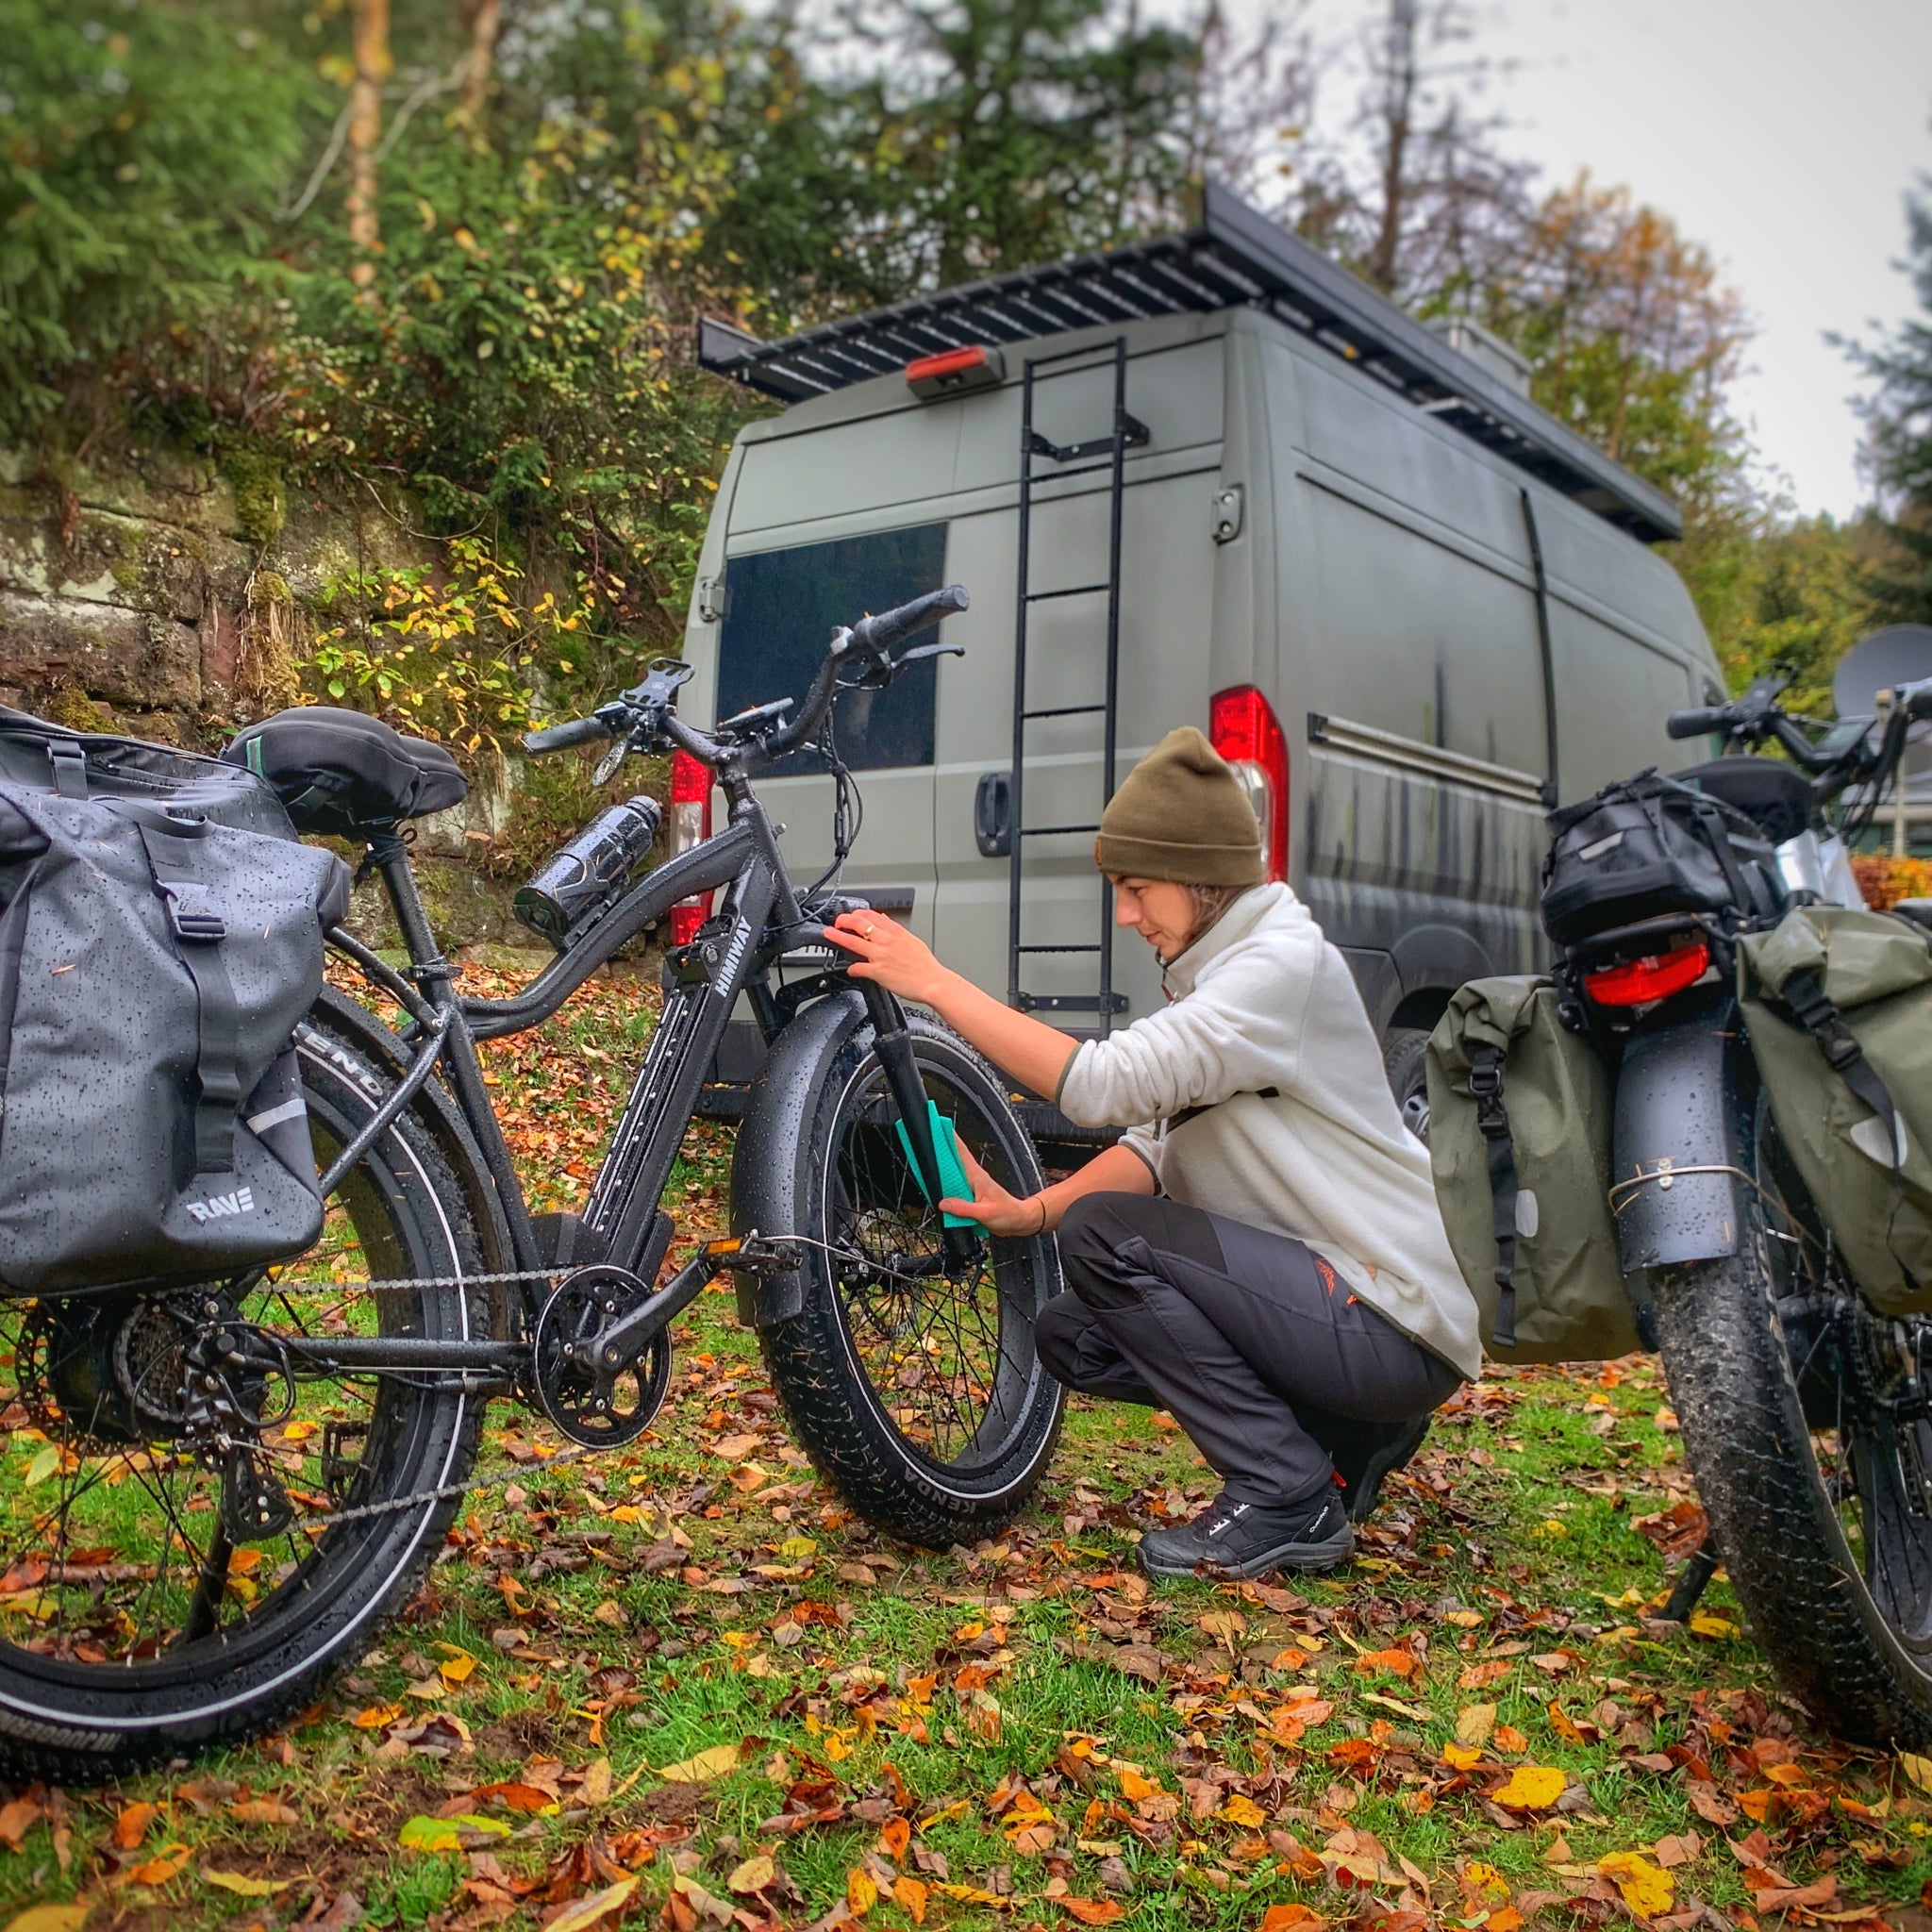 How To Easily Regulate The Tire Pressure on Your Fat Tire Bike | Himiway